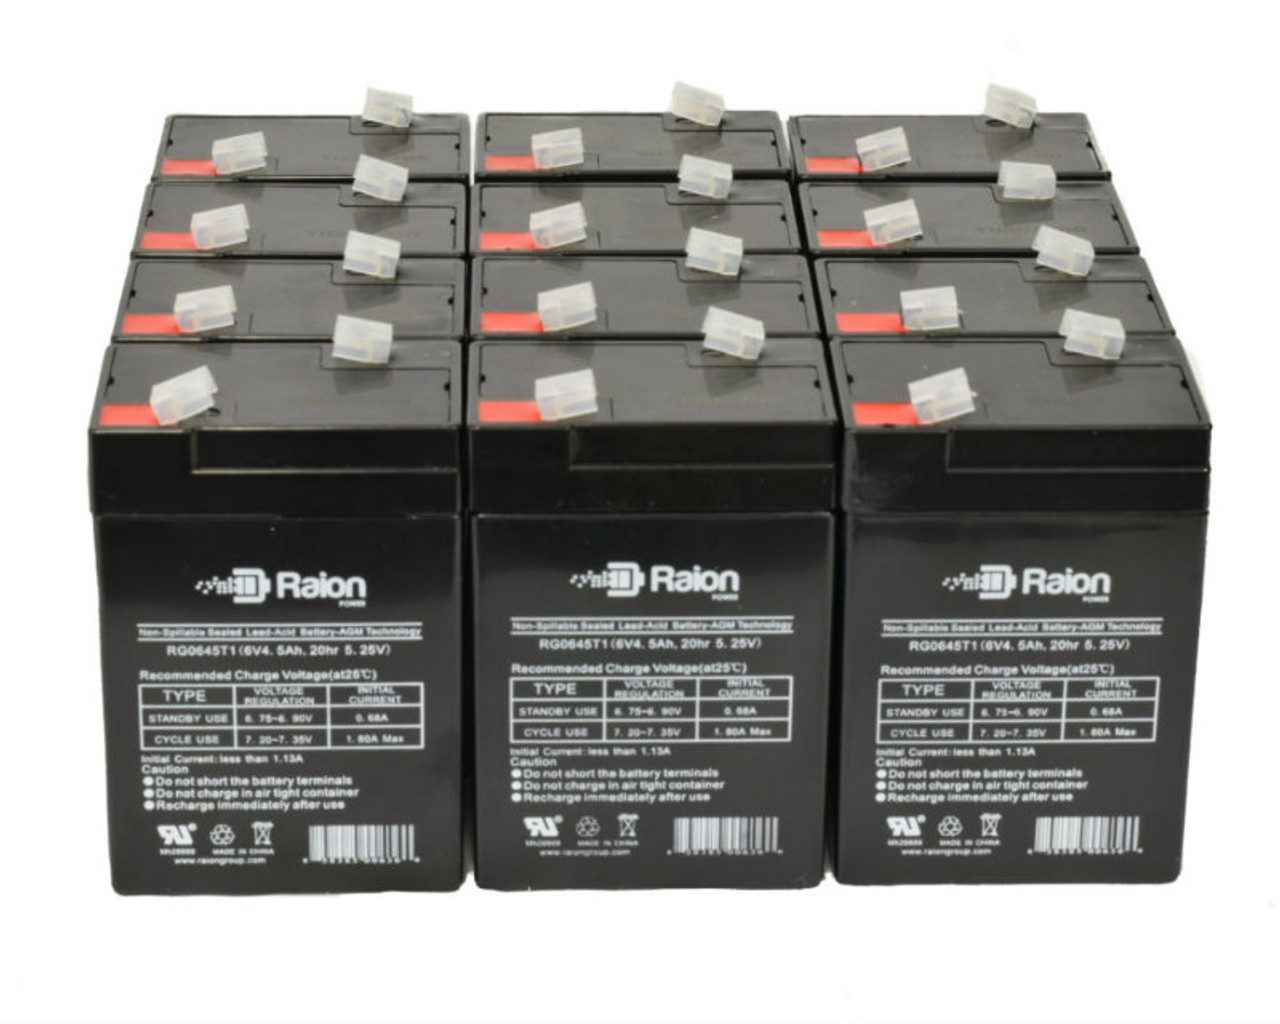 Raion Power 6V 4.5Ah Replacement Emergency Light Battery for Lithonia LLBE2 - 12 Pack